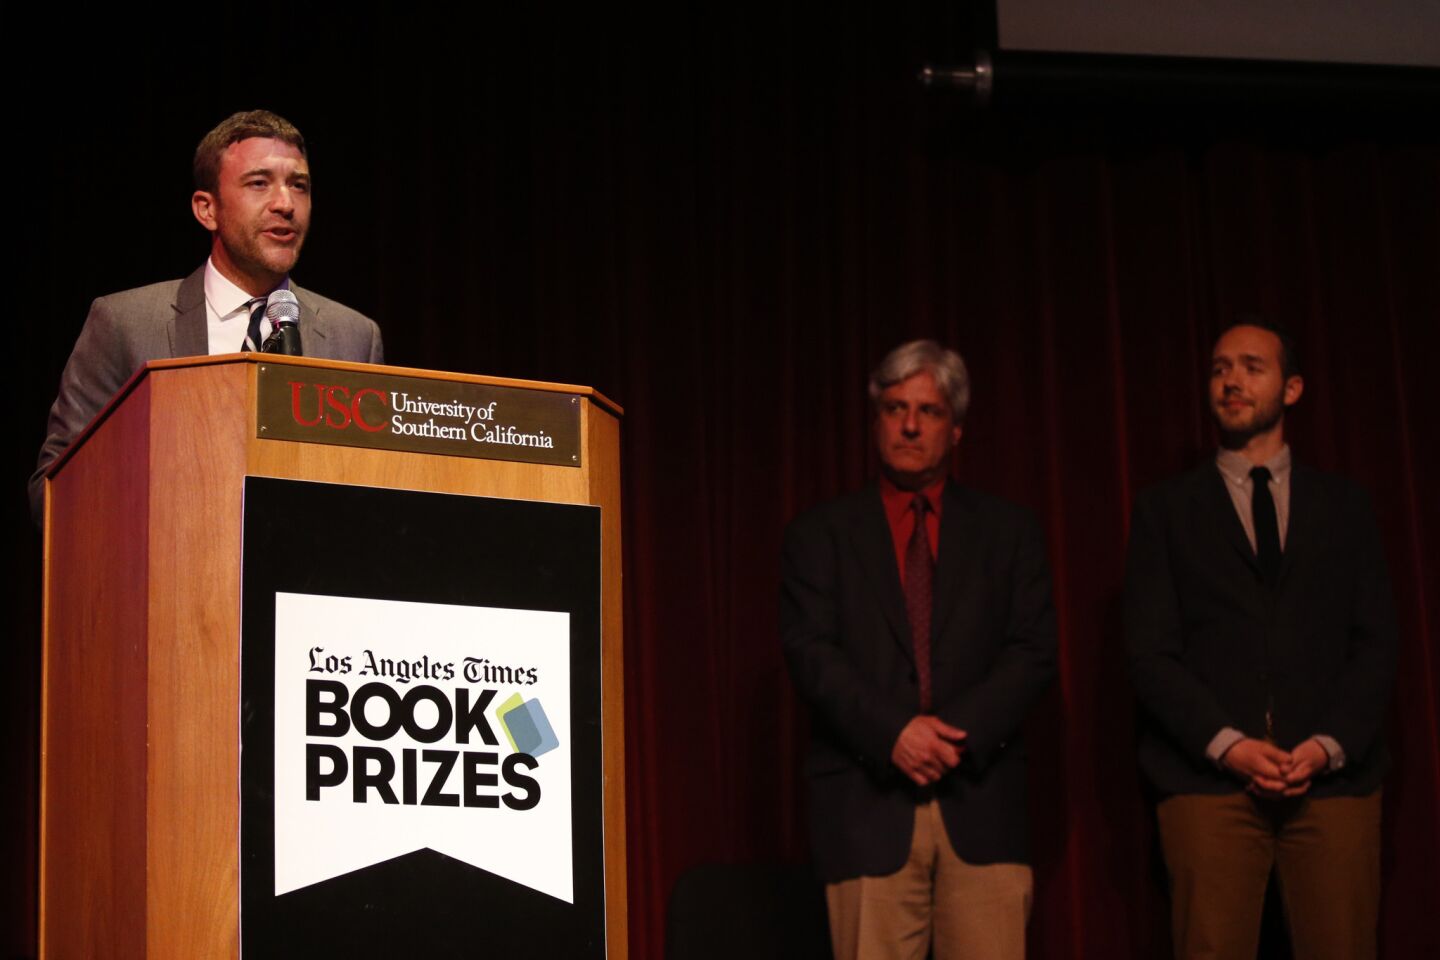 los angeles times book prize for biography